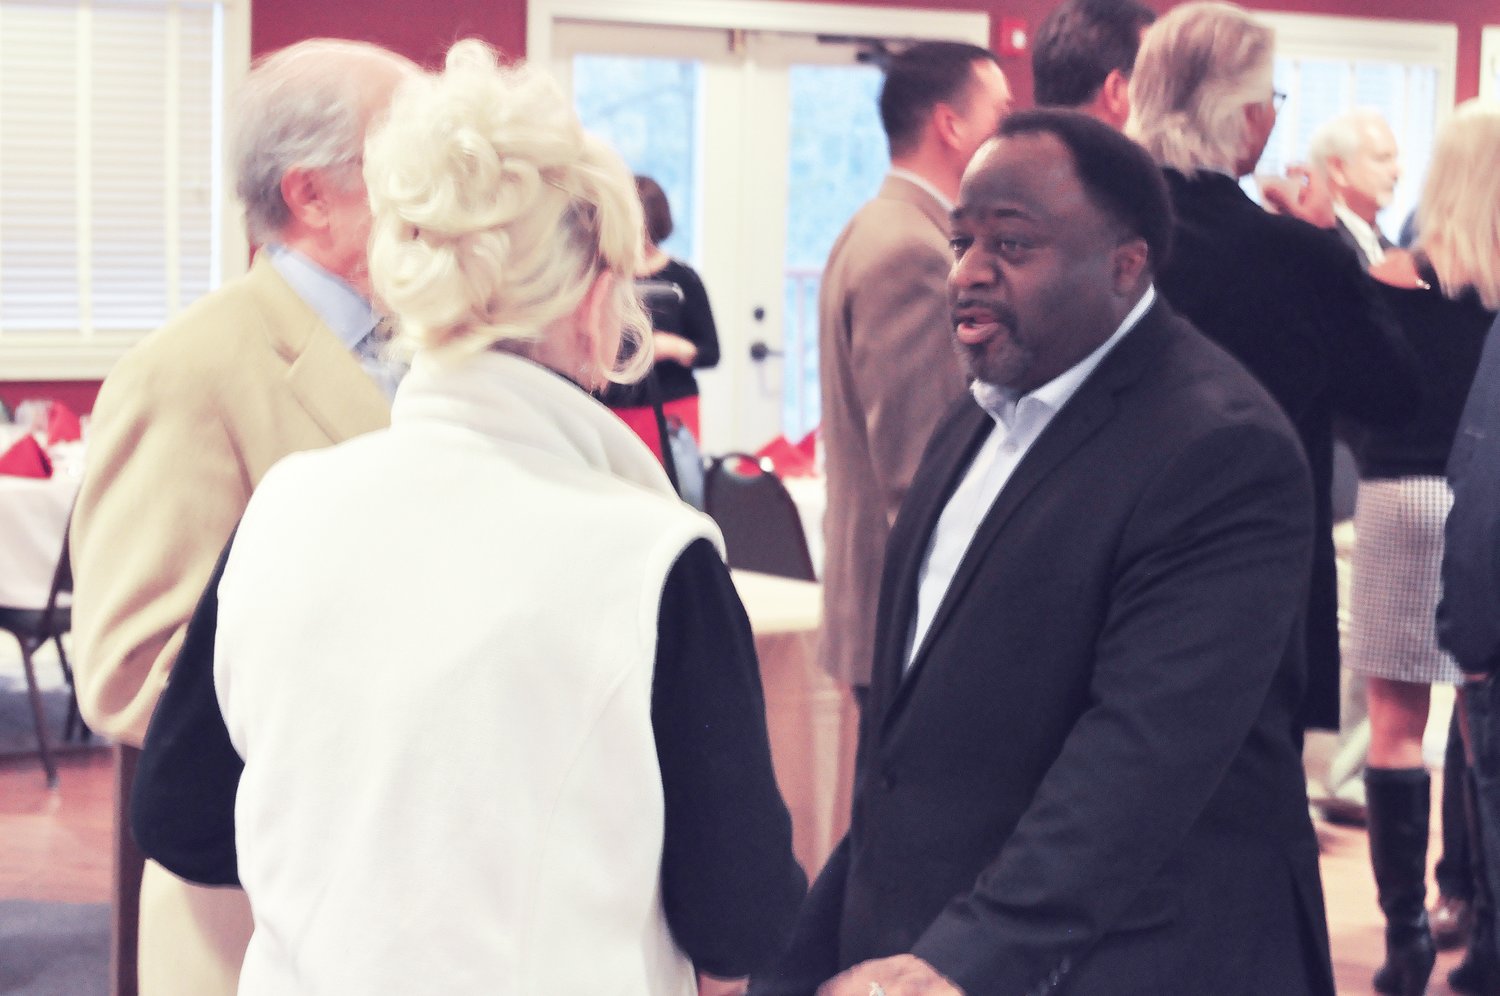 Political commentator Abdul Hakim-Shabazz chats with Kurt and Carol Homann on Tuesday before his remarks at the Montgomery County Lincoln Day Dinner at the Crawfordsville Country Club.